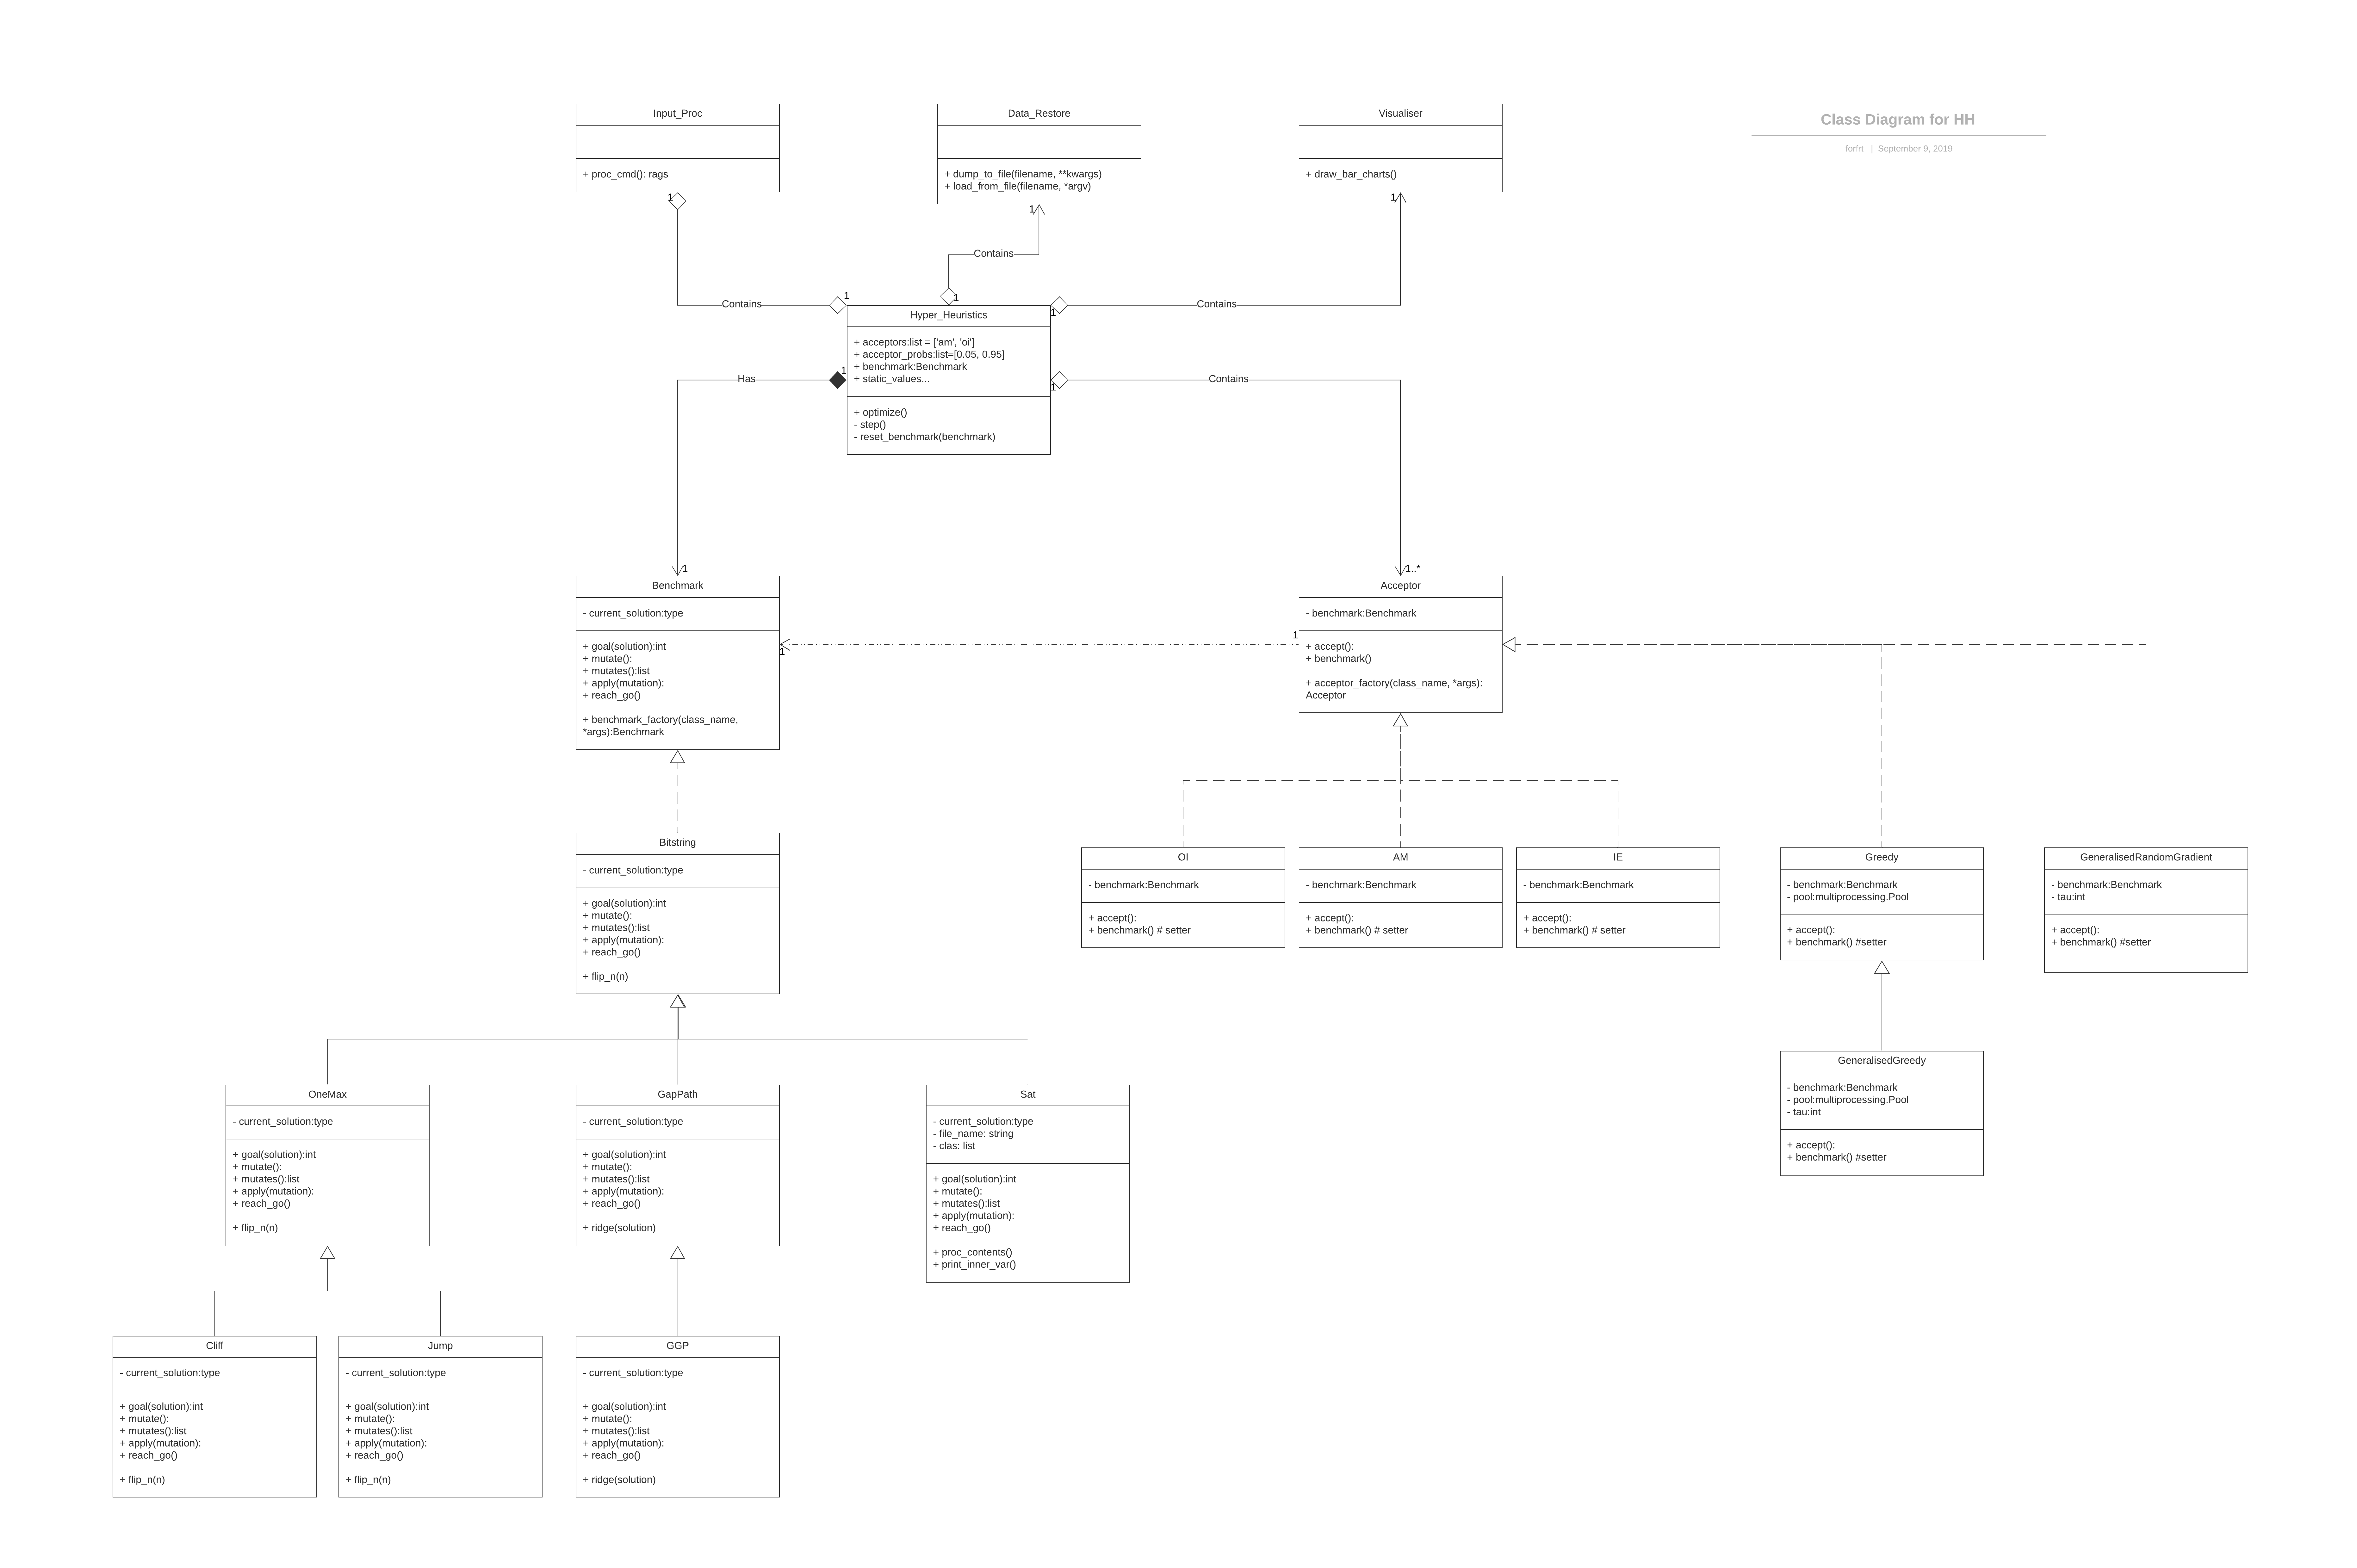 HH_class_diagram_overview.png